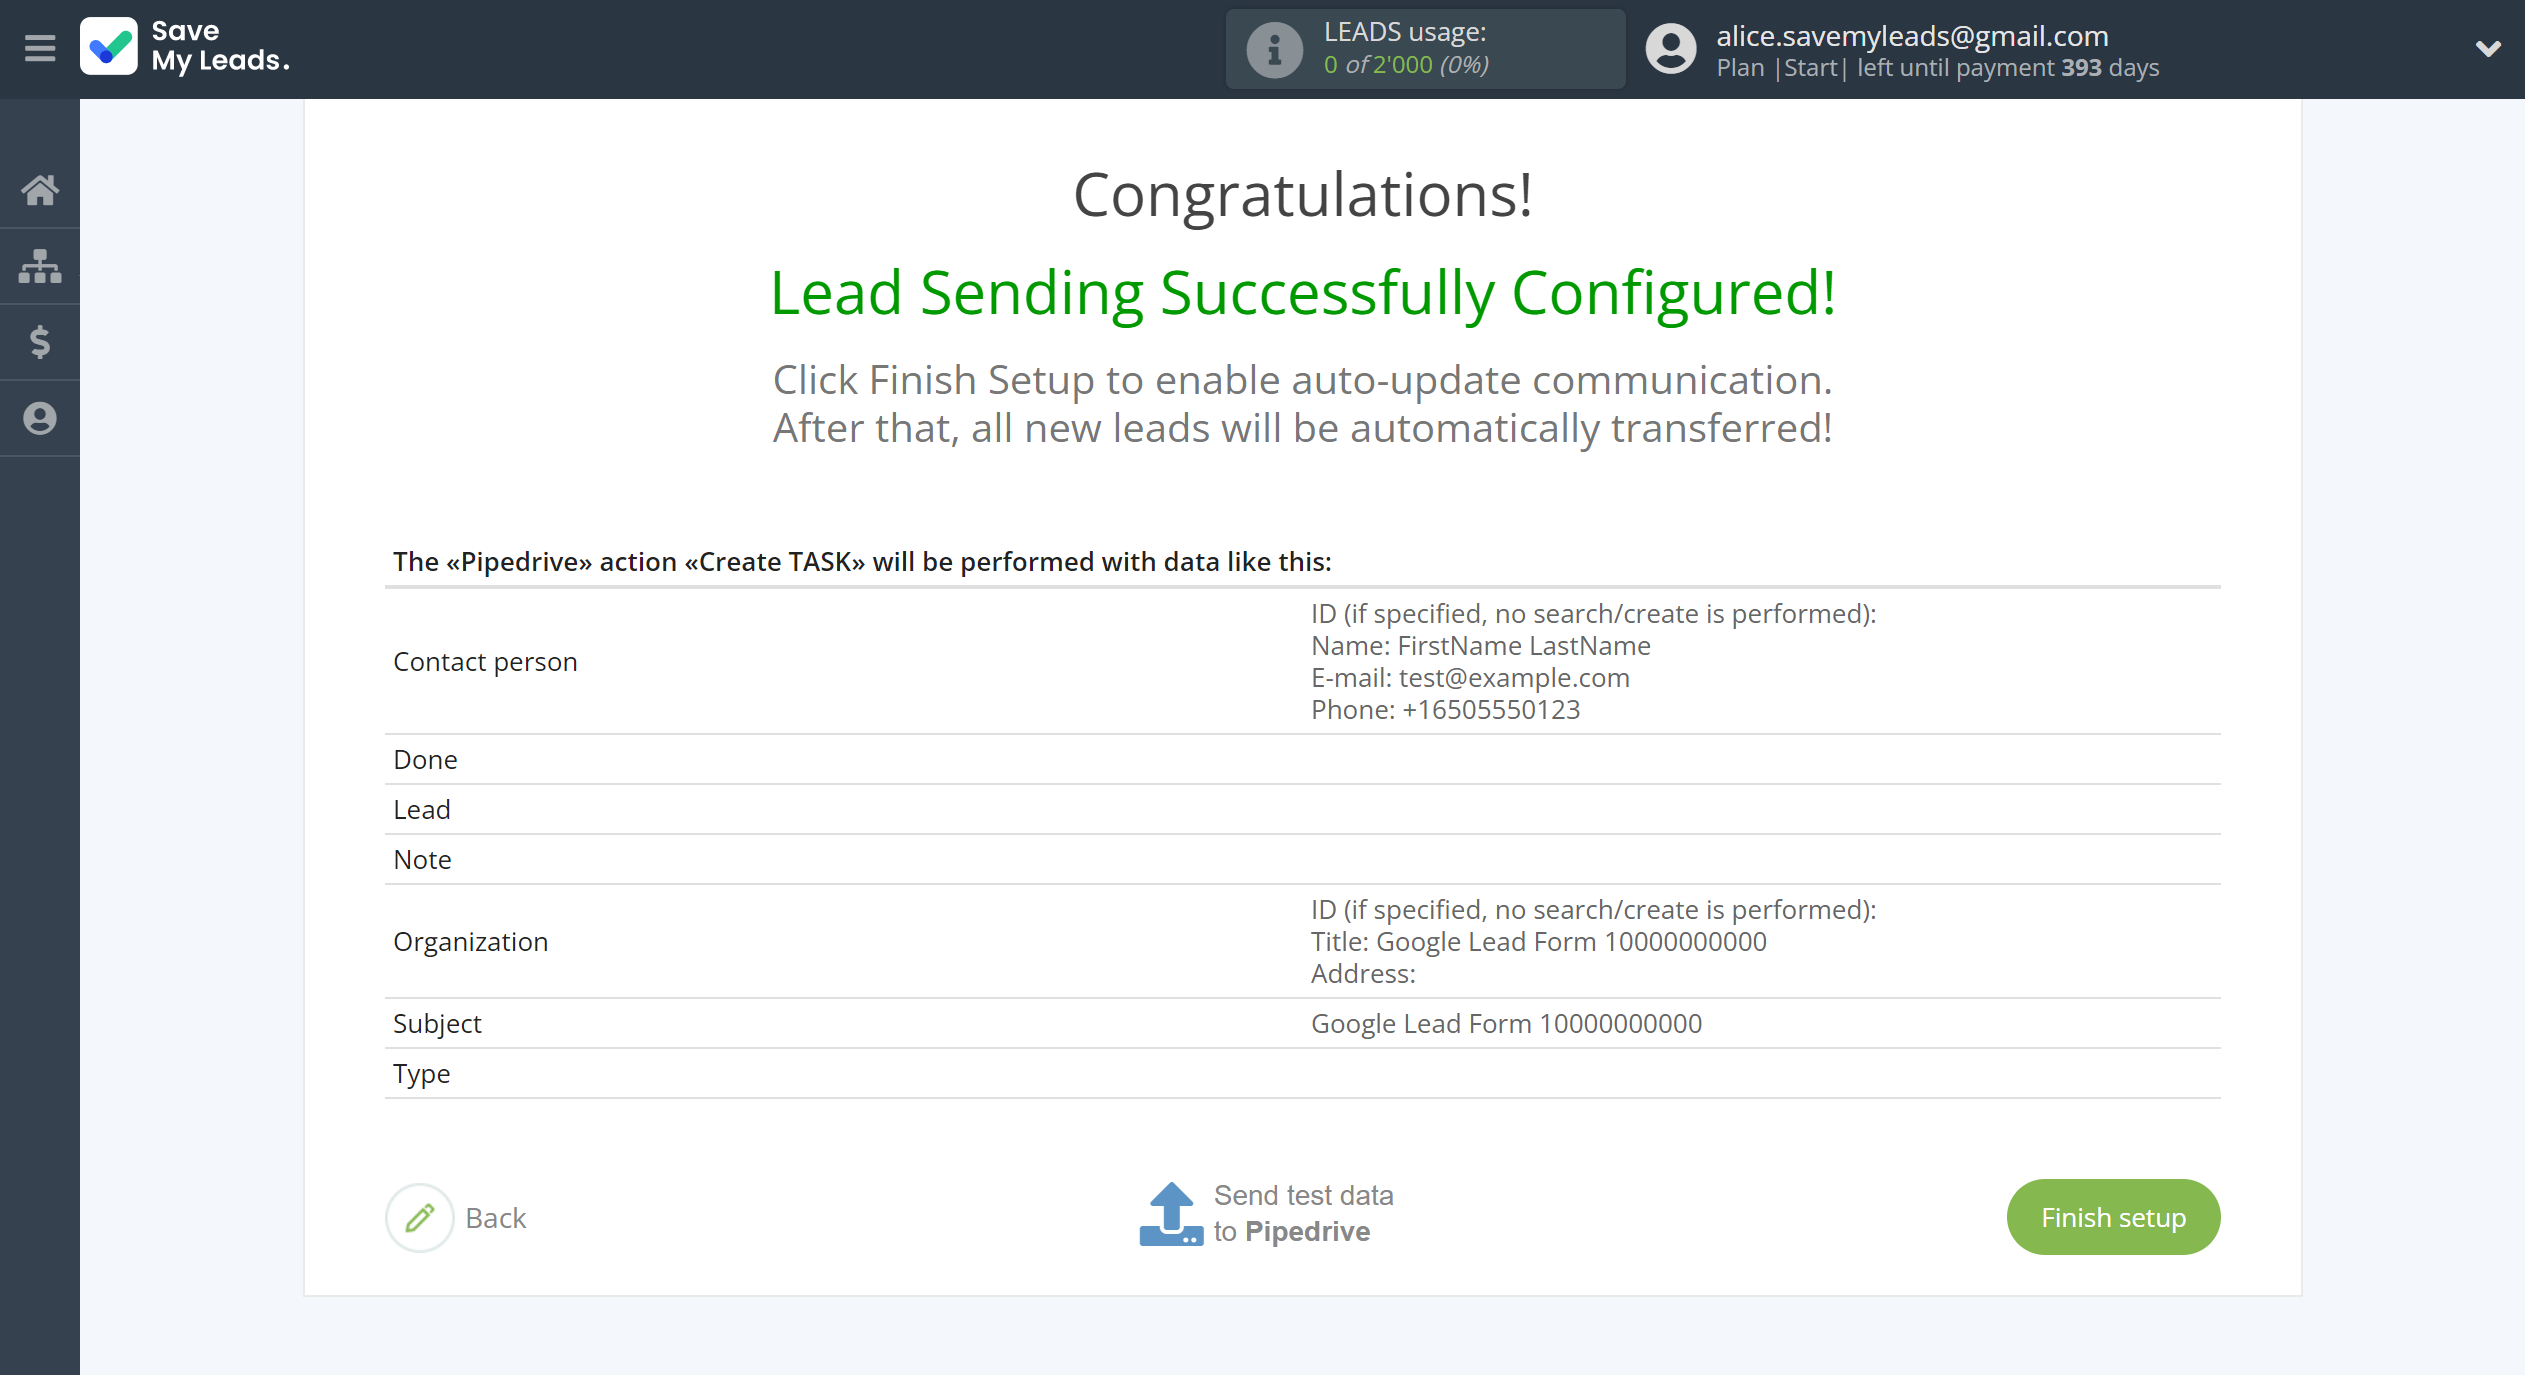 How to Connect Google Lead Form with Pipedrive Create Task | Test data